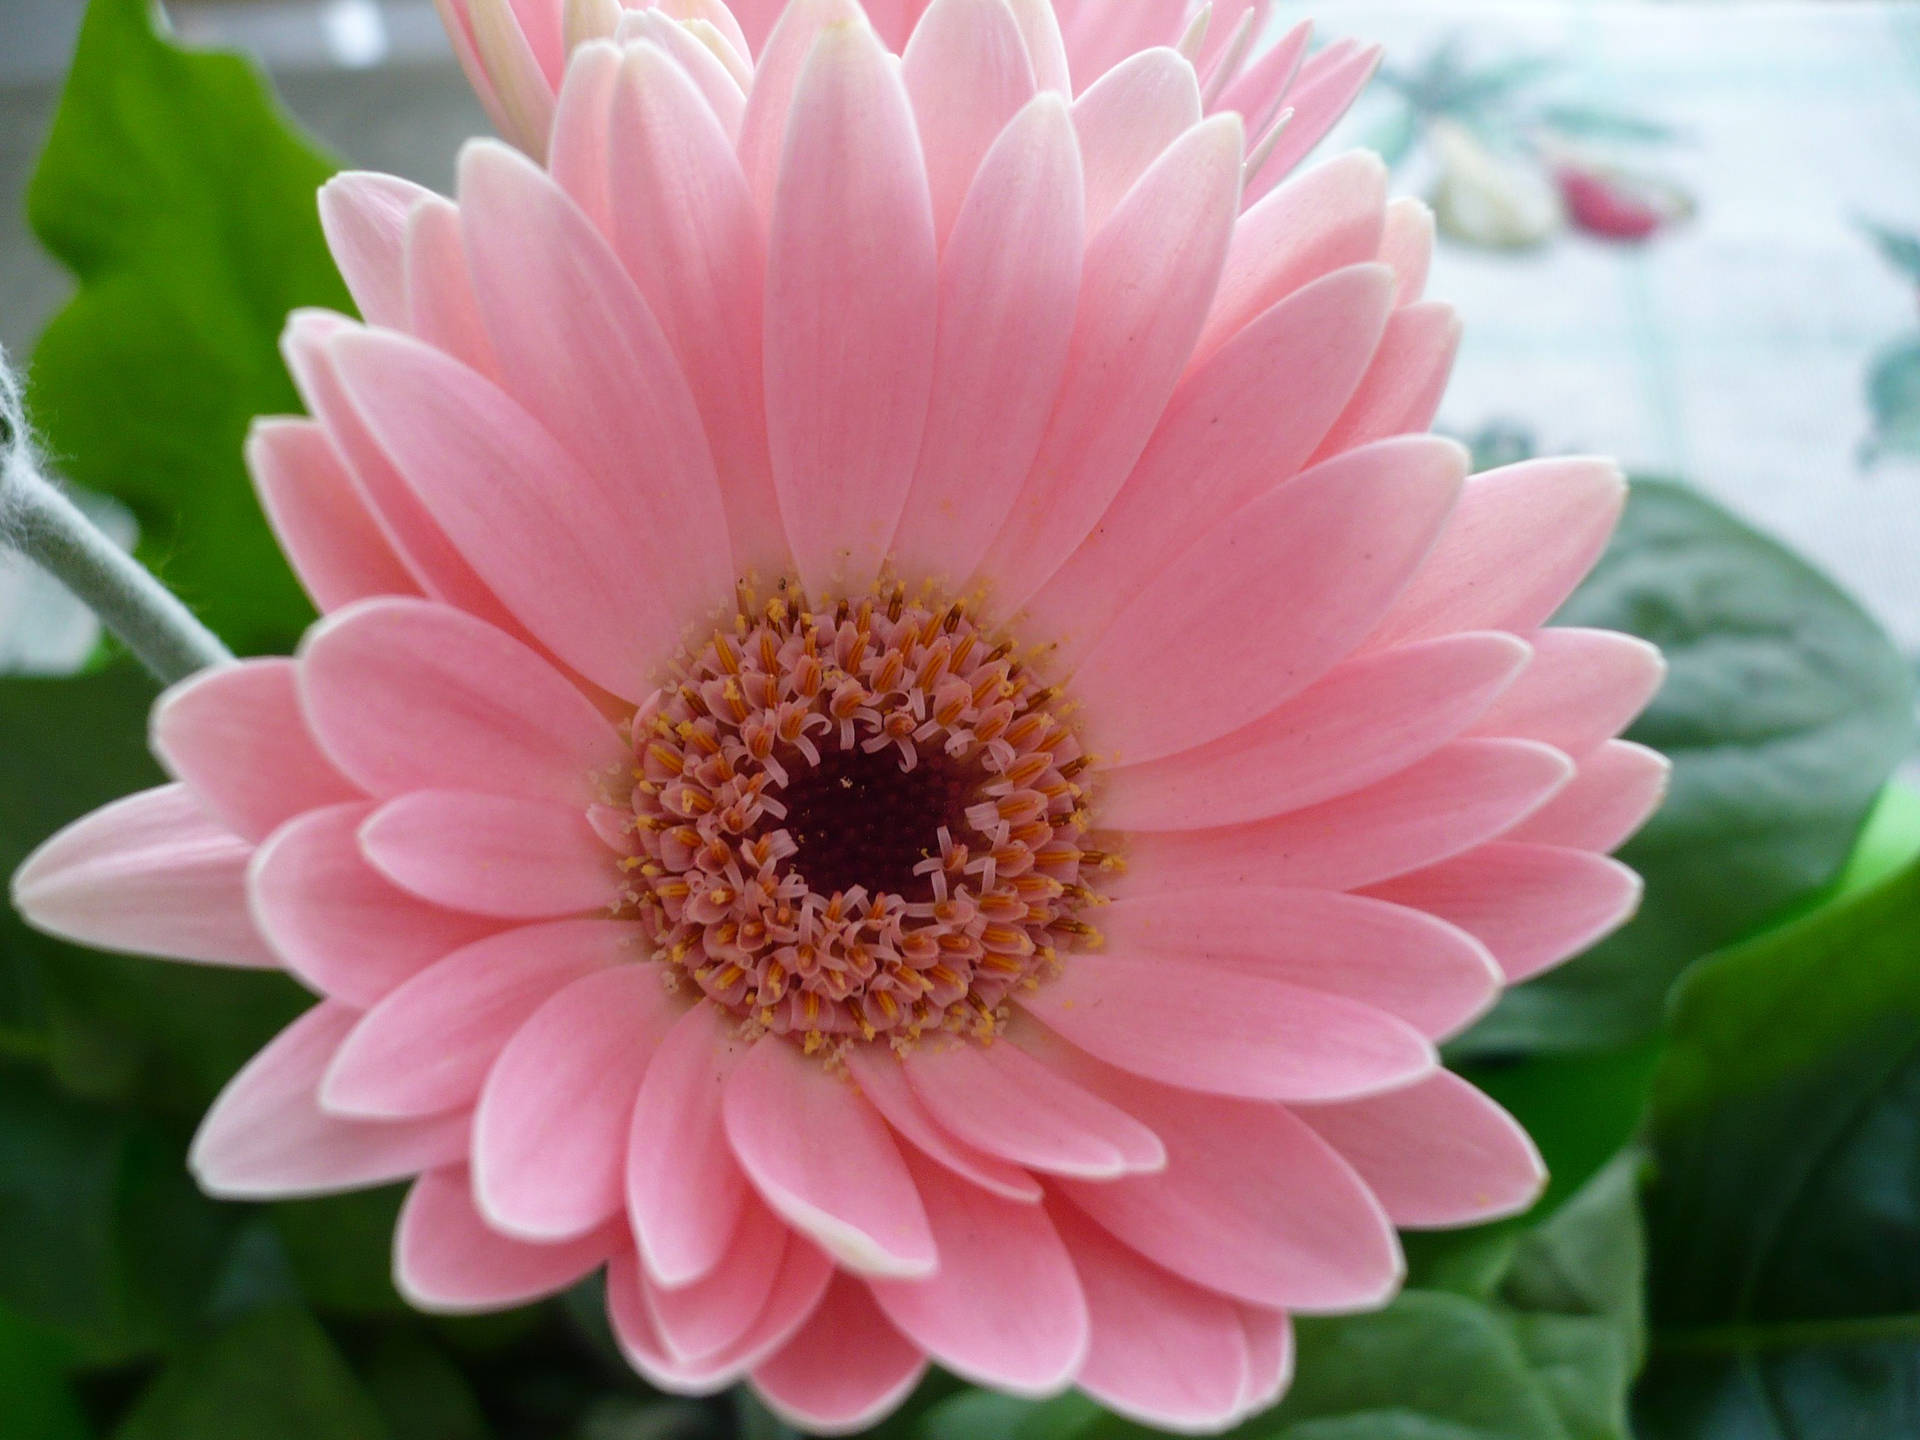 Cute Pink Flower Close-Up Image 